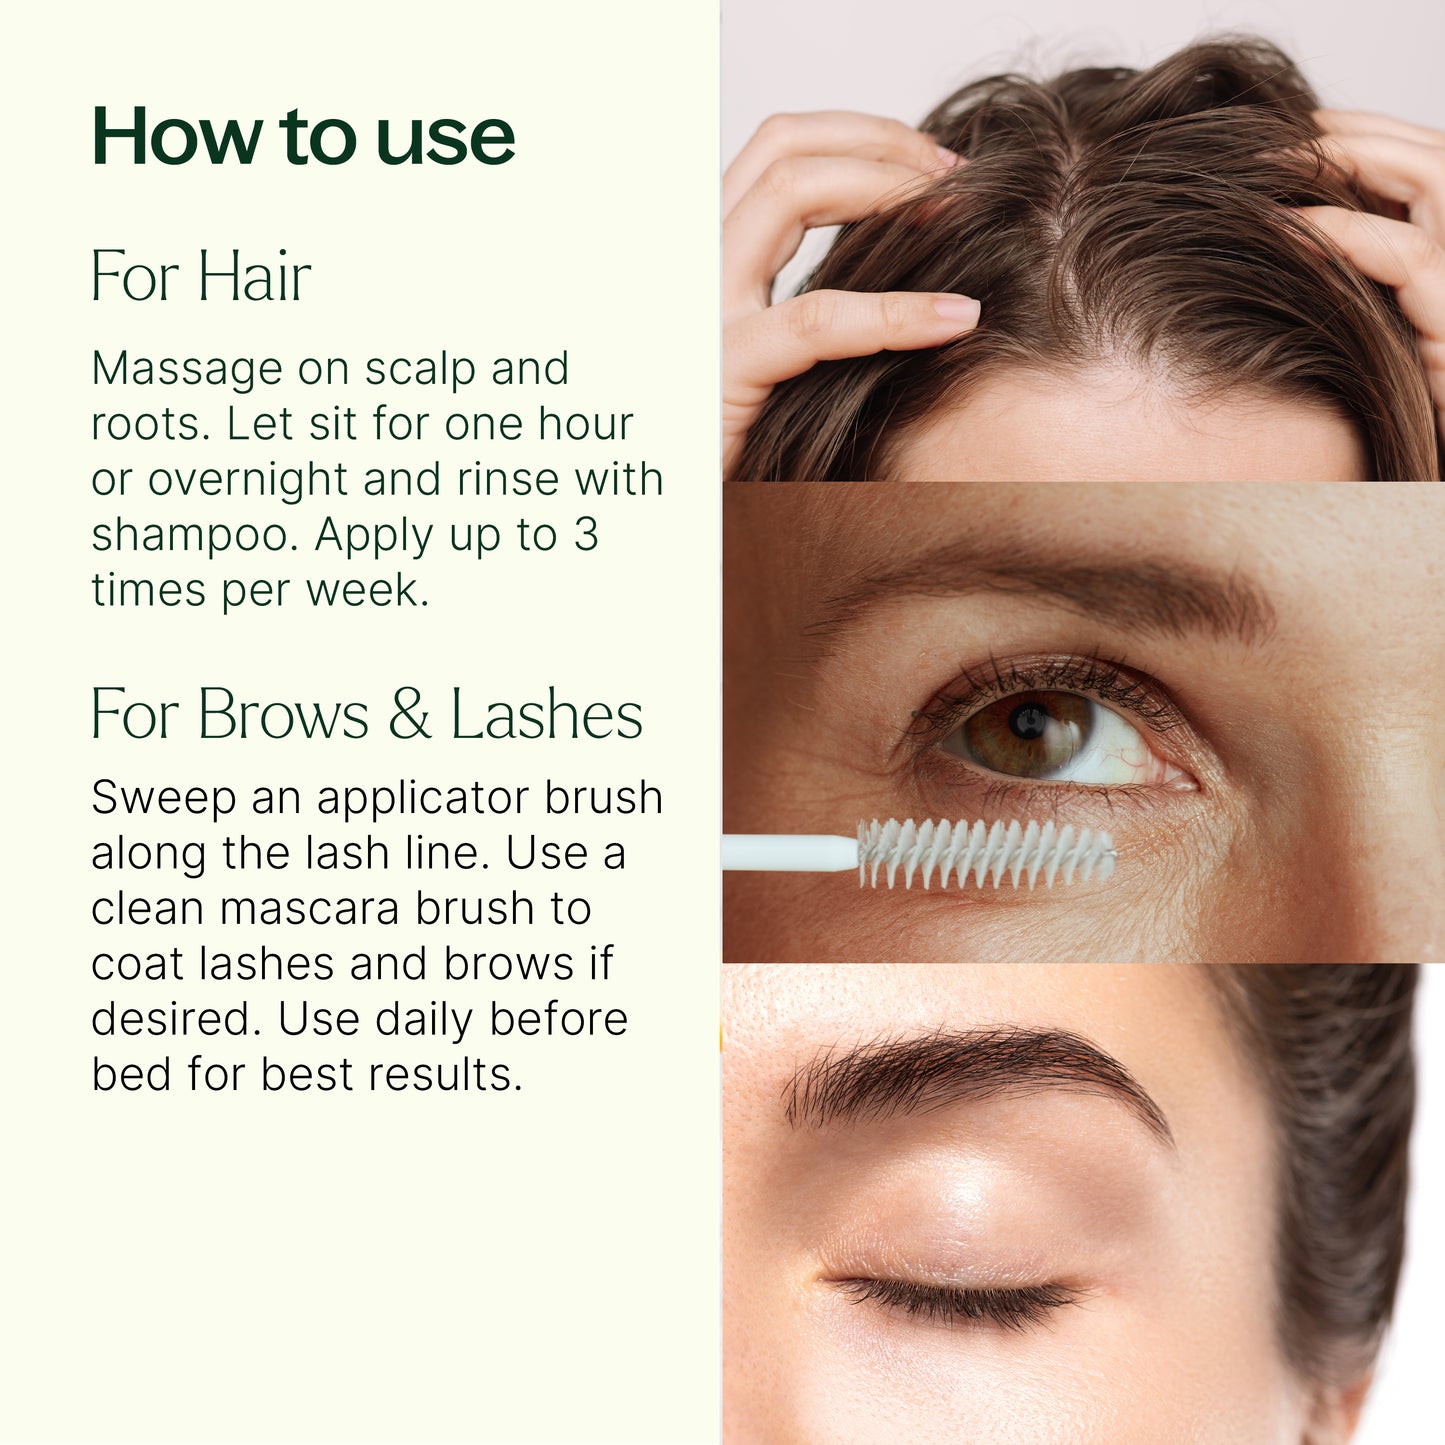 How to use: For hair, massage on scalp, let sit for 1 hour or overnight and rinse with shampoo. Apply up to 3 times per week. For brows/lashes: sweep an applicator along the lash line. Use a clean mascara brush to coat lashes and brows if desired. Use daily before bed for best results. 